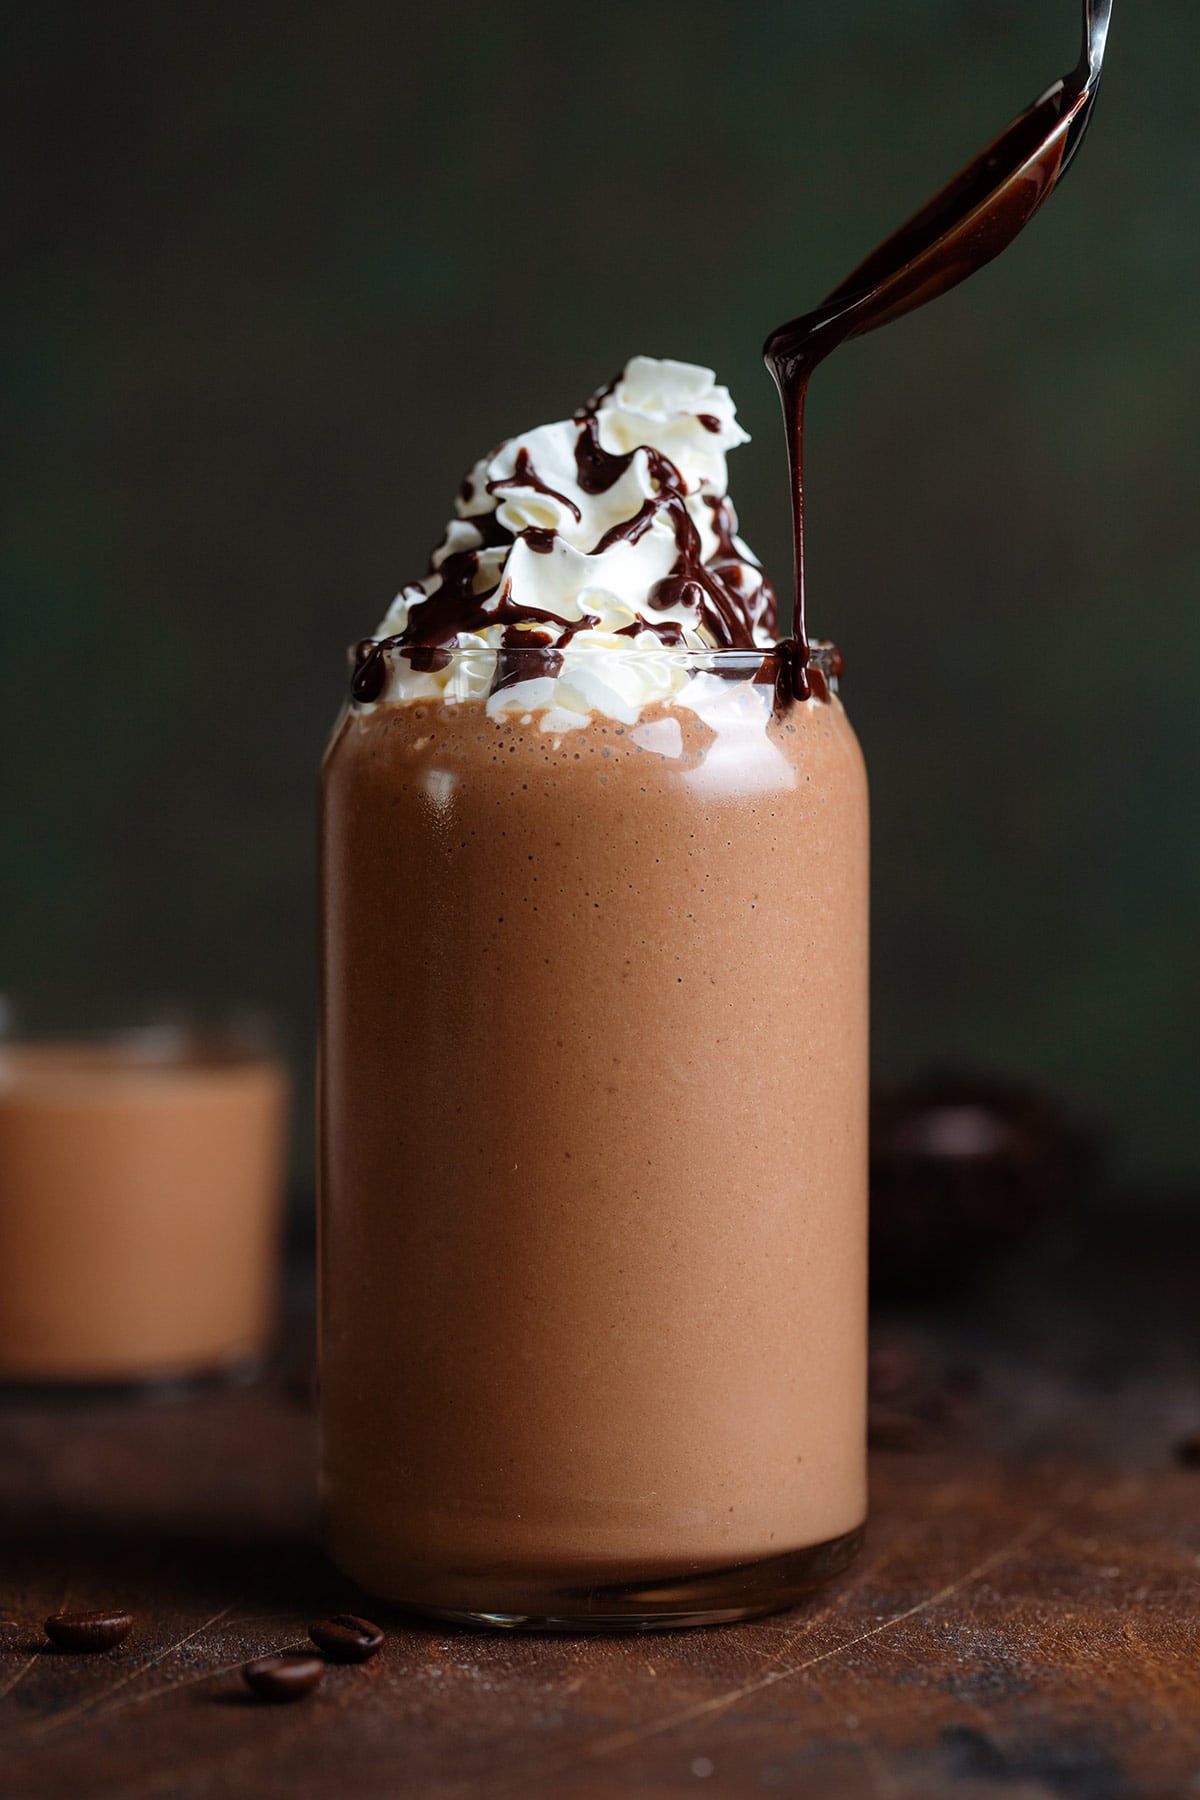 A dark brown mocha smoothie in a tall glass garnished with whipped cream being drizzled with chocolate sauce.